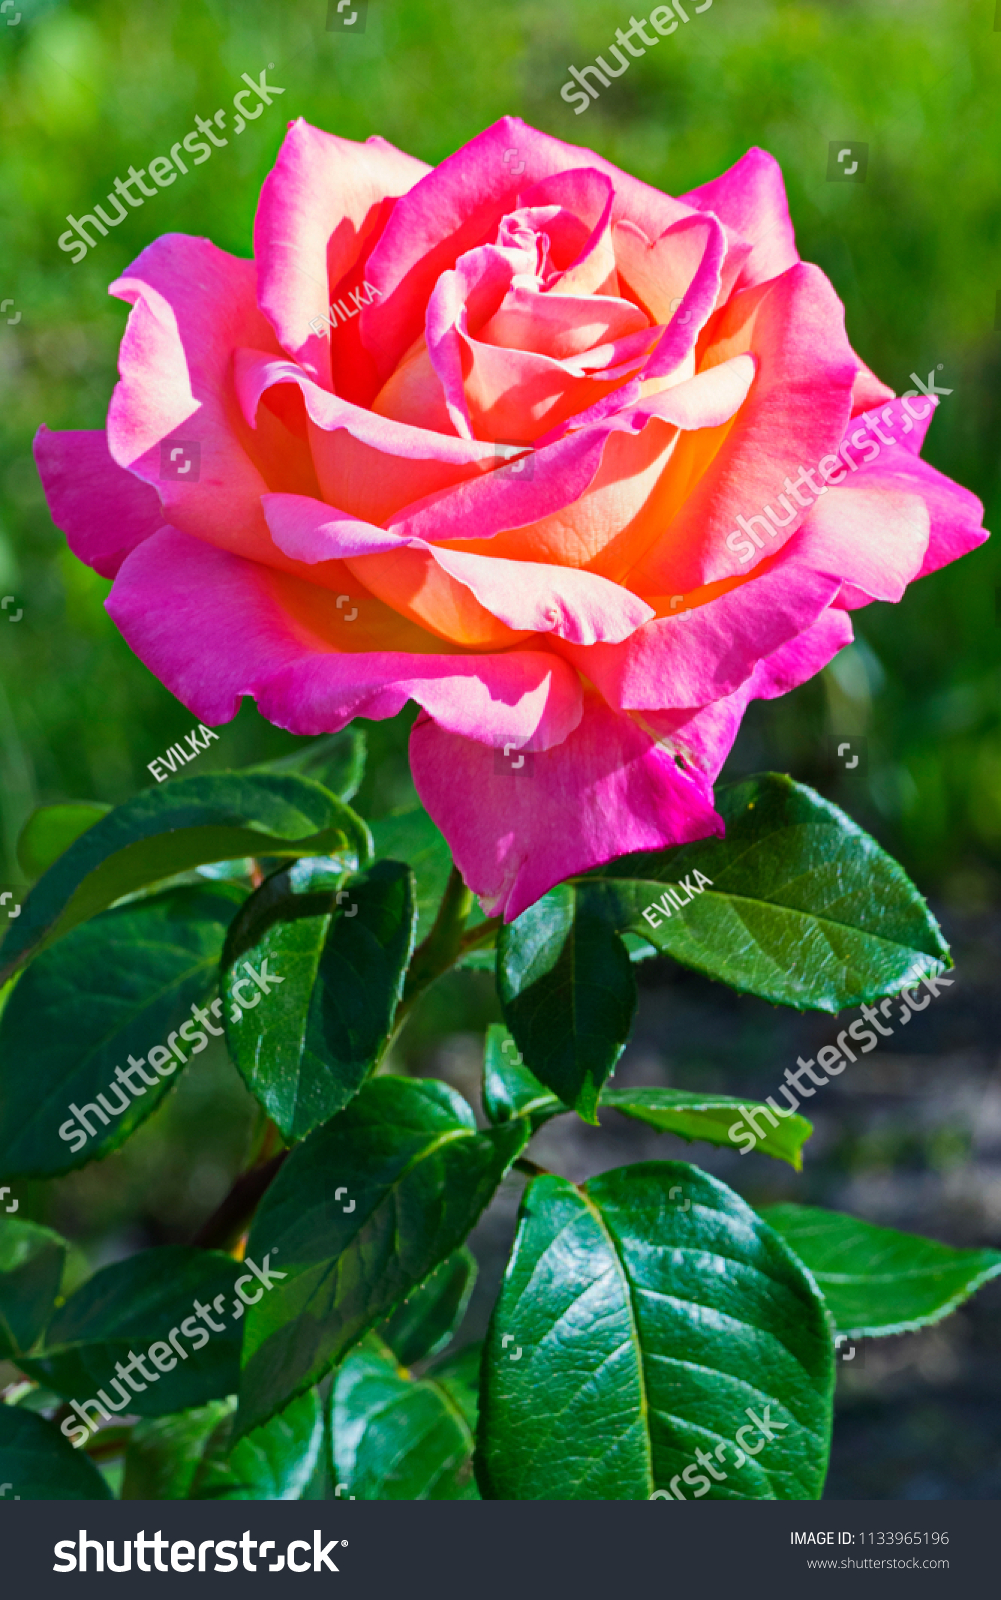 a bright lush rose with lush green leaves and tender petals #1133965196